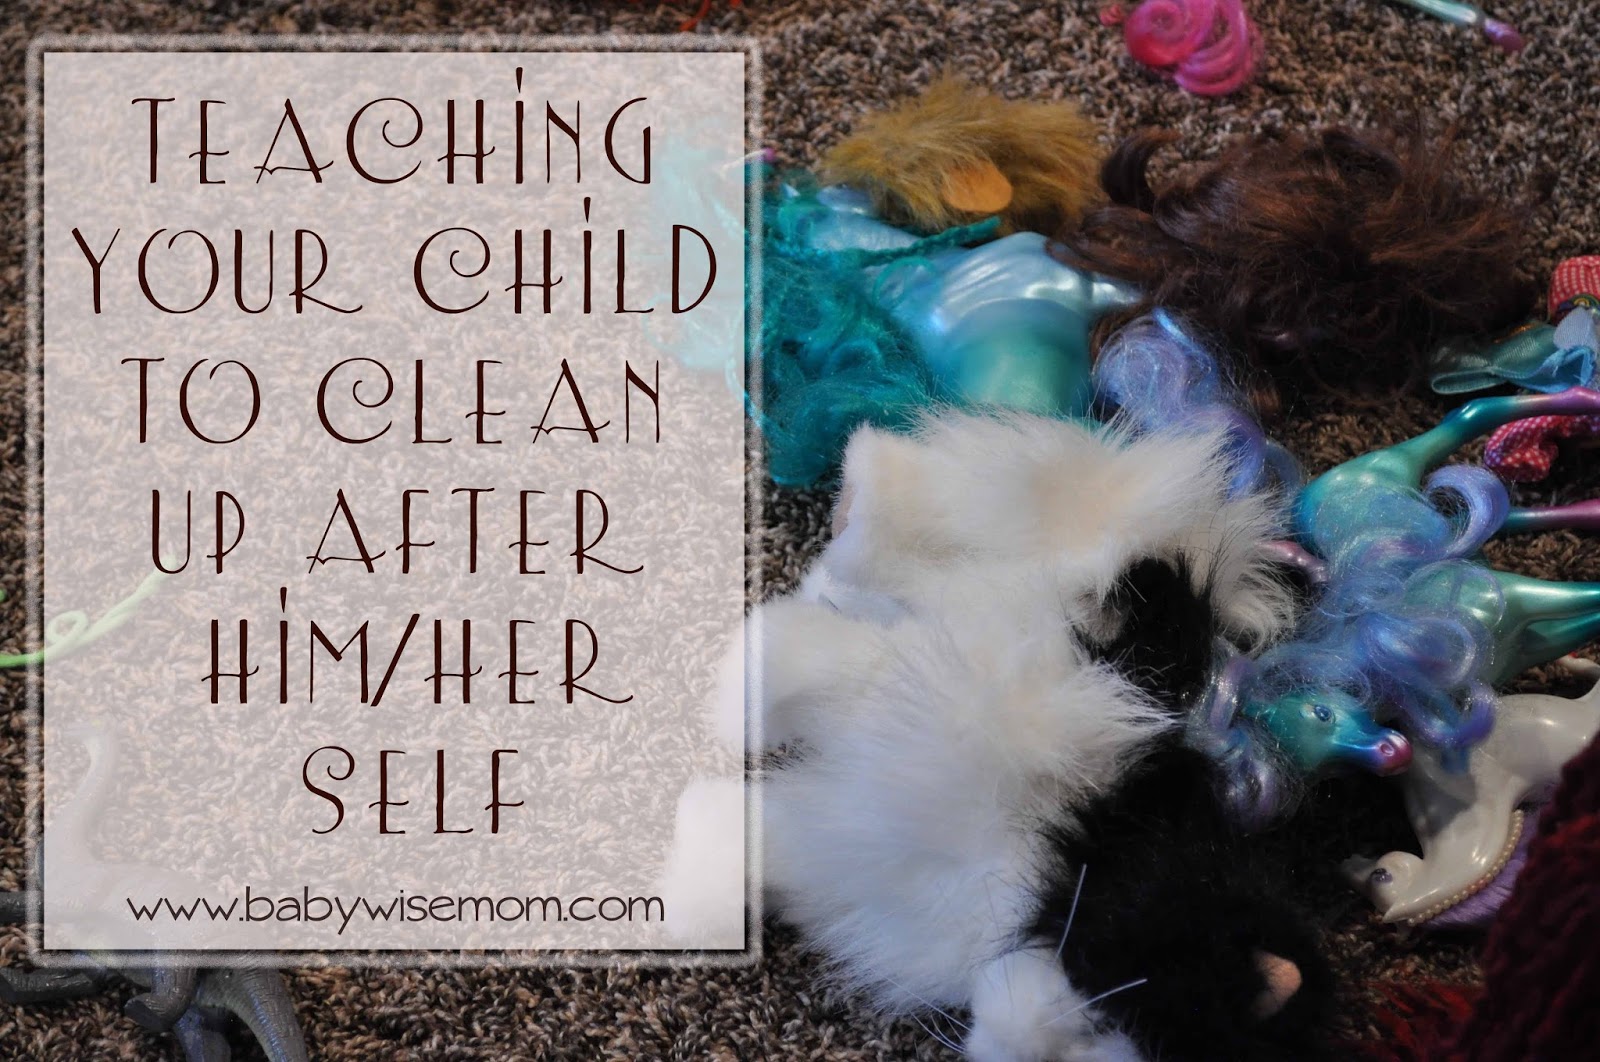 Teaching Your Child To Clean Up After Self - Chronicles of a Babywise Mom